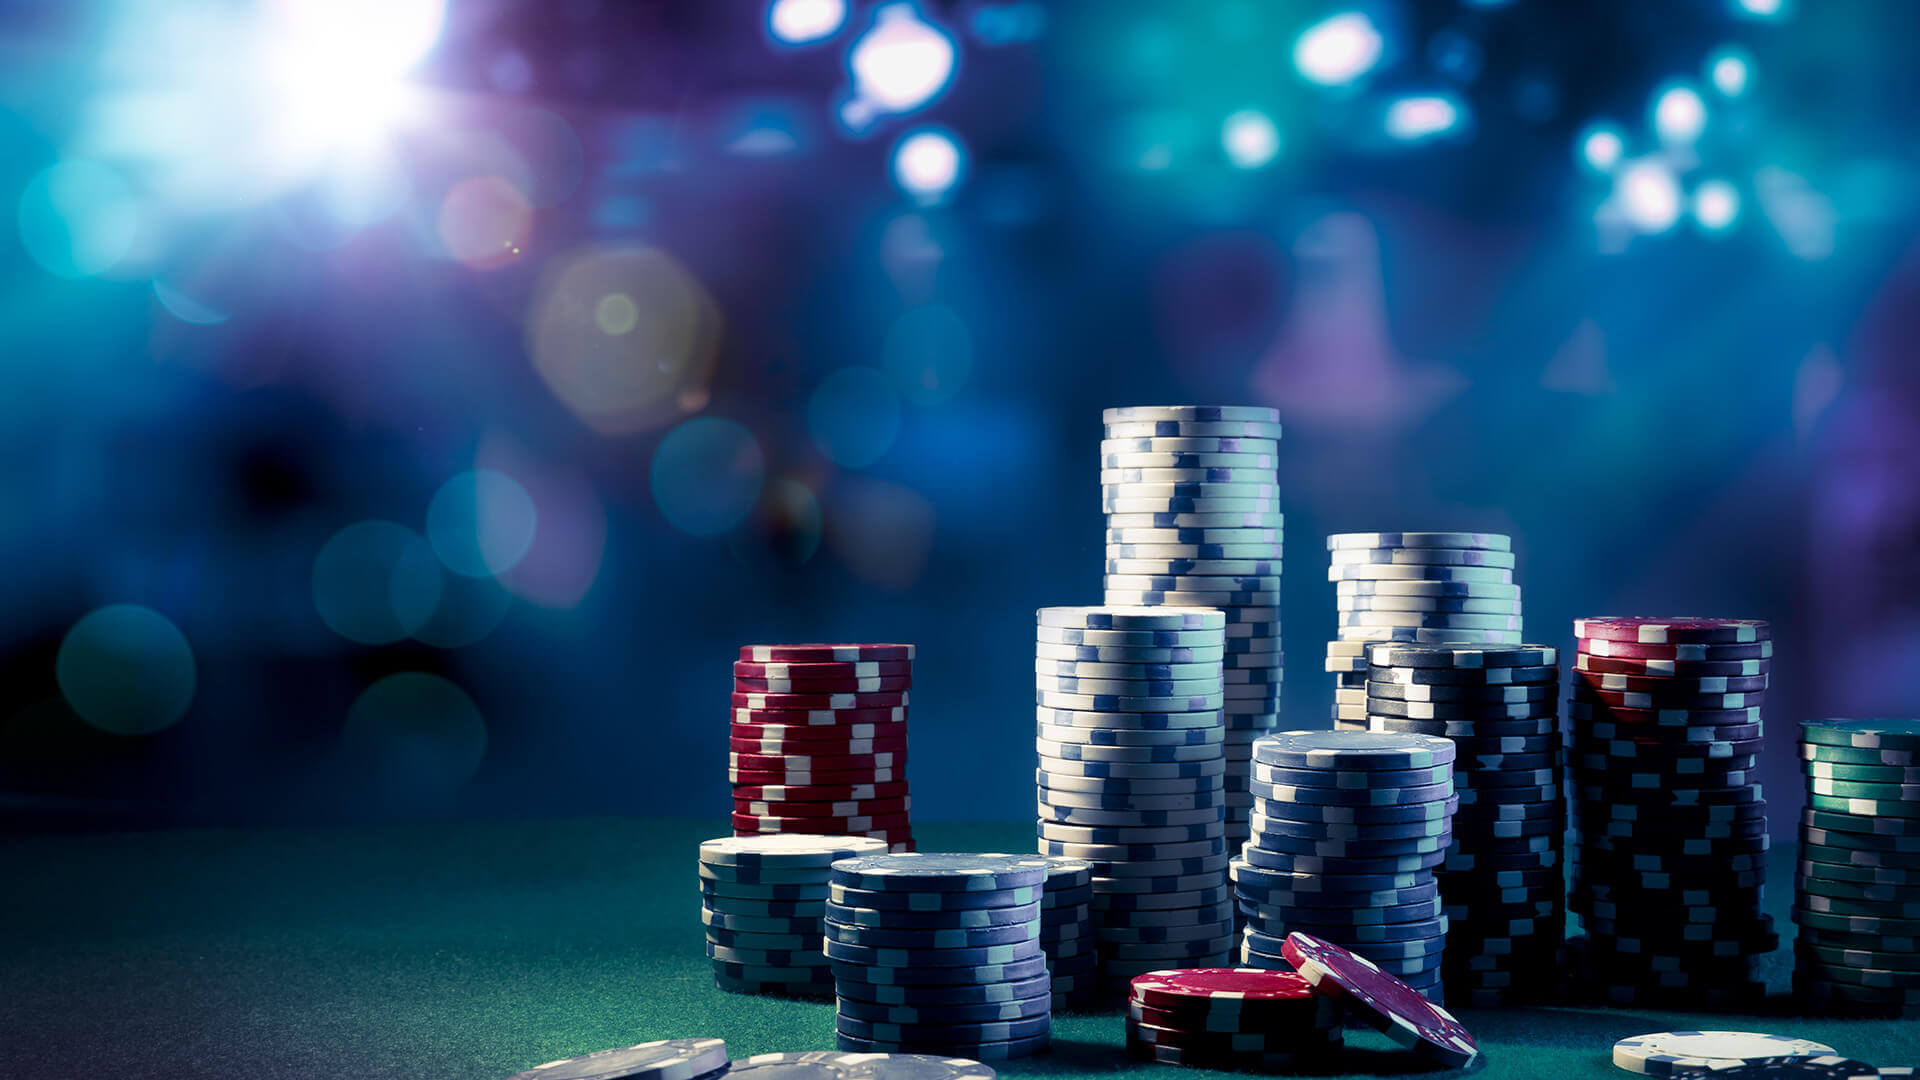 Where Can You Find Free online casino Resources